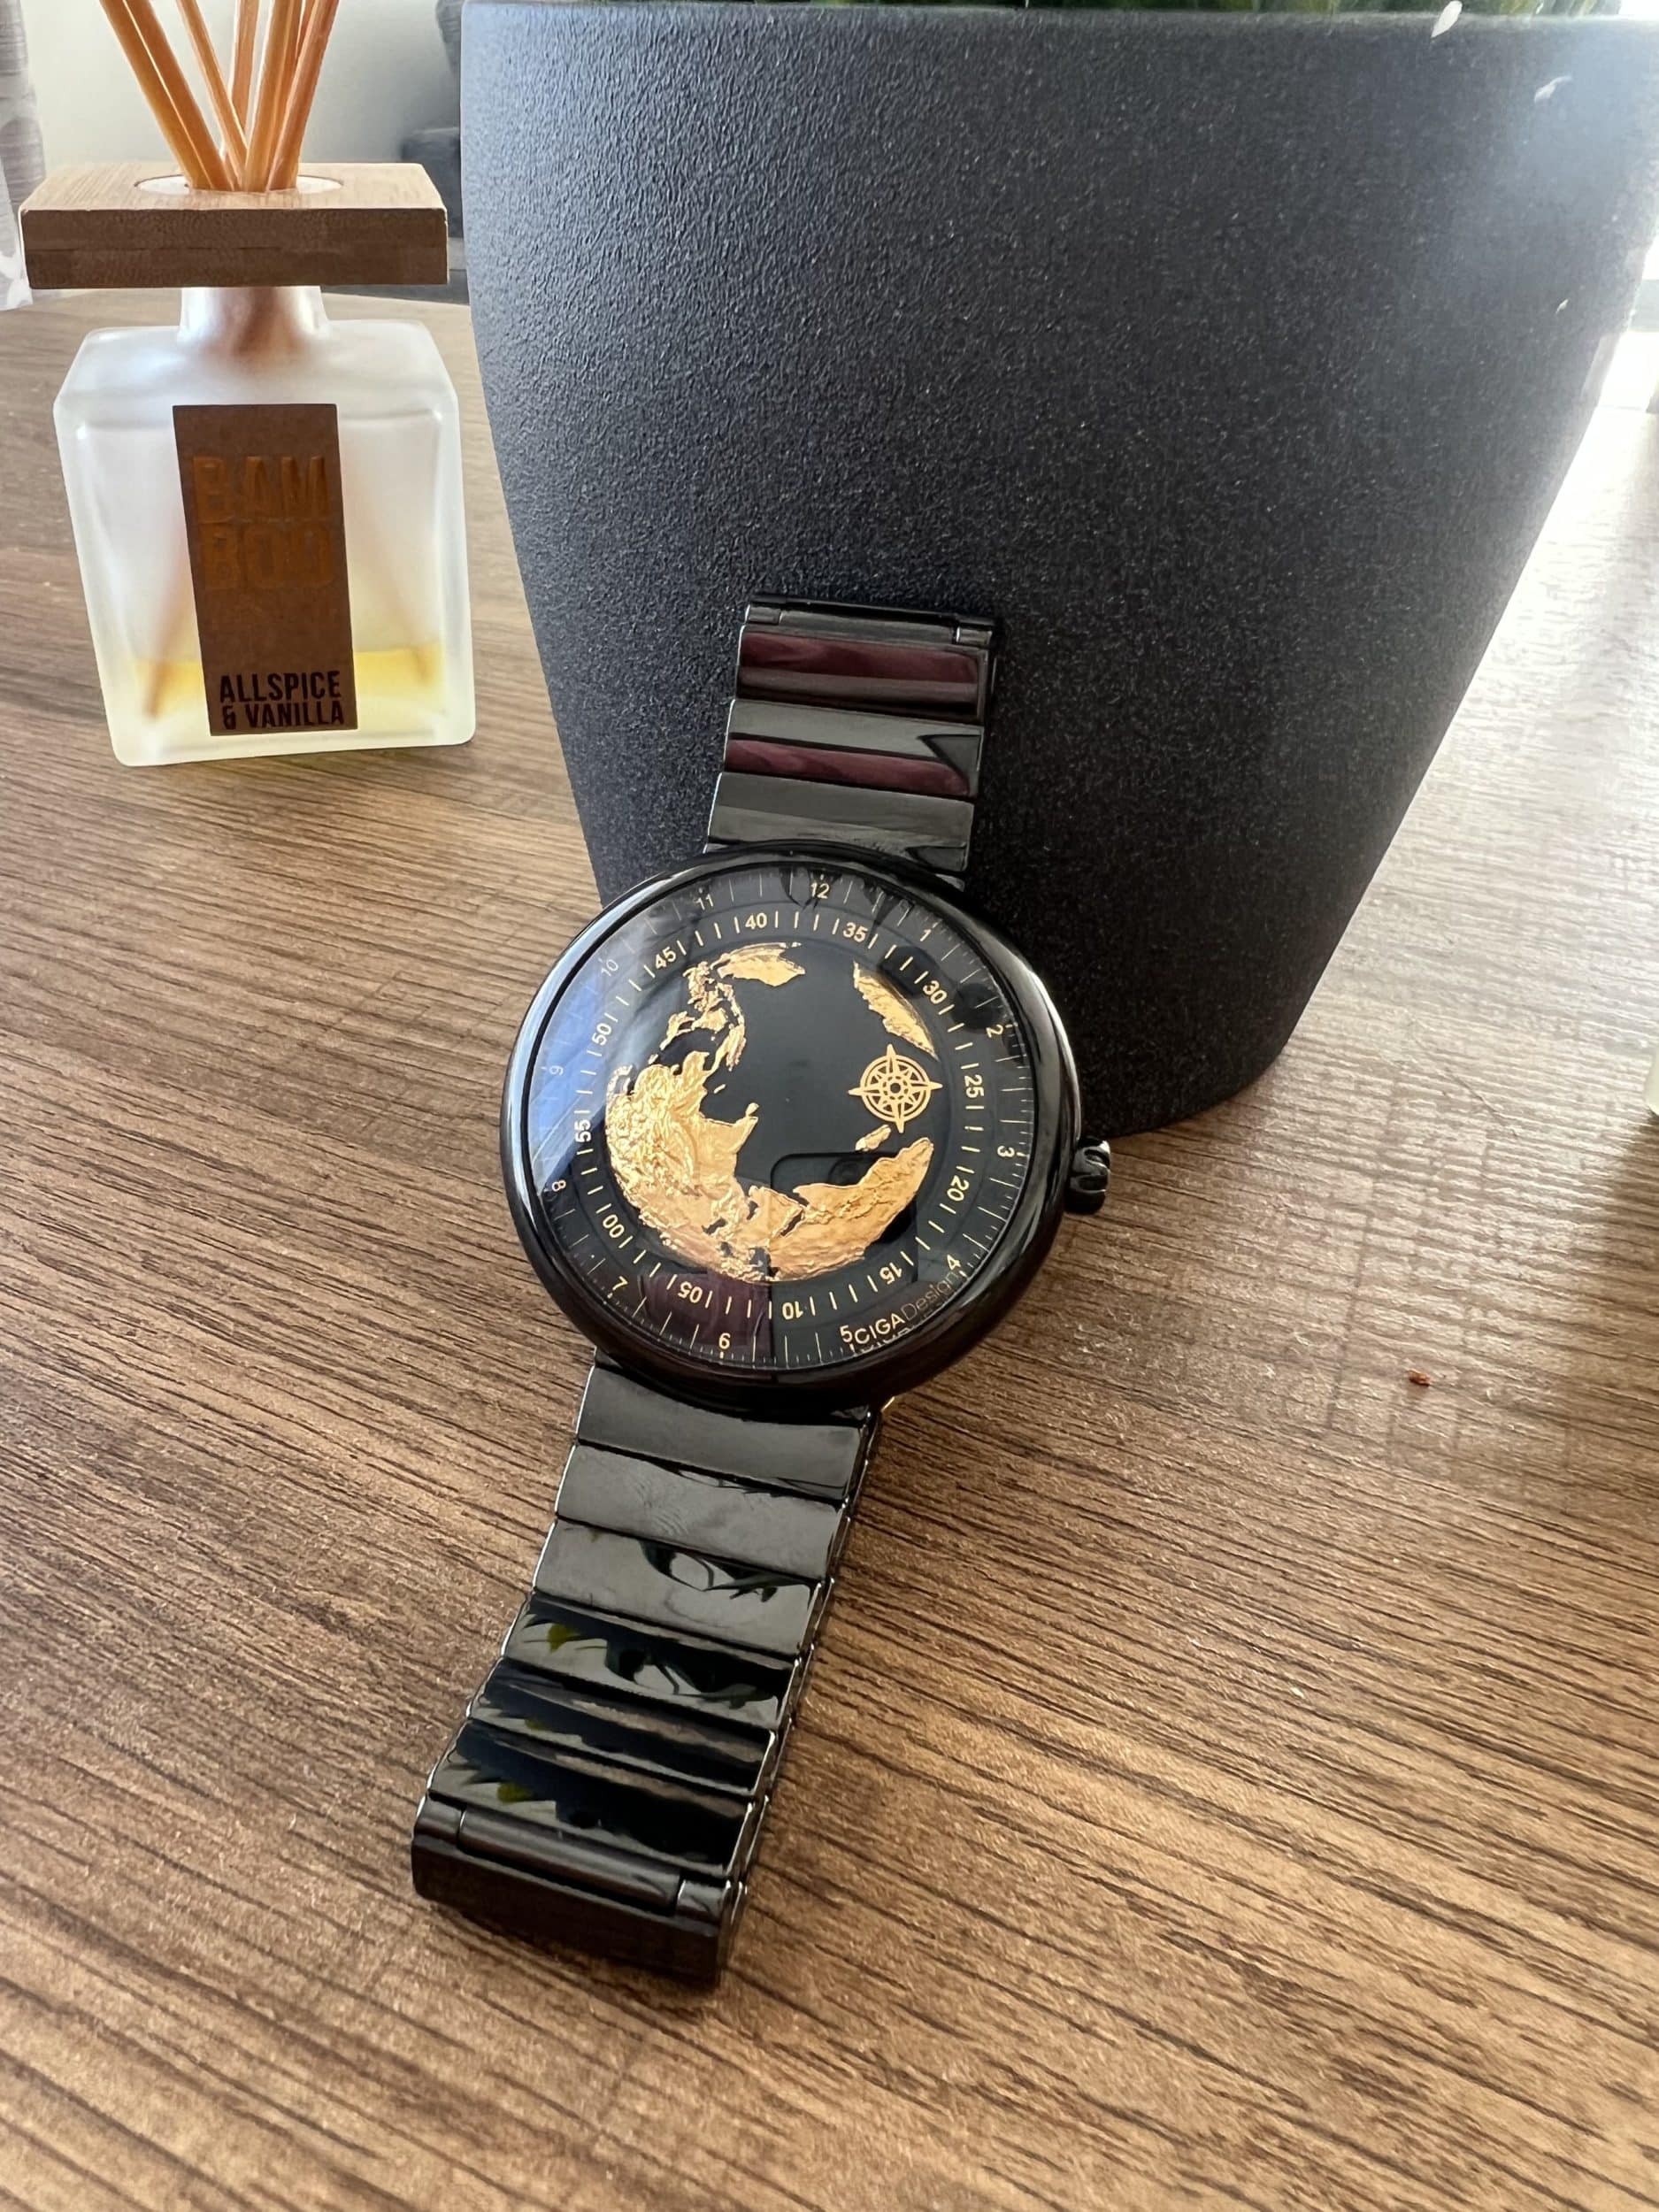 Gold and black watch on the table